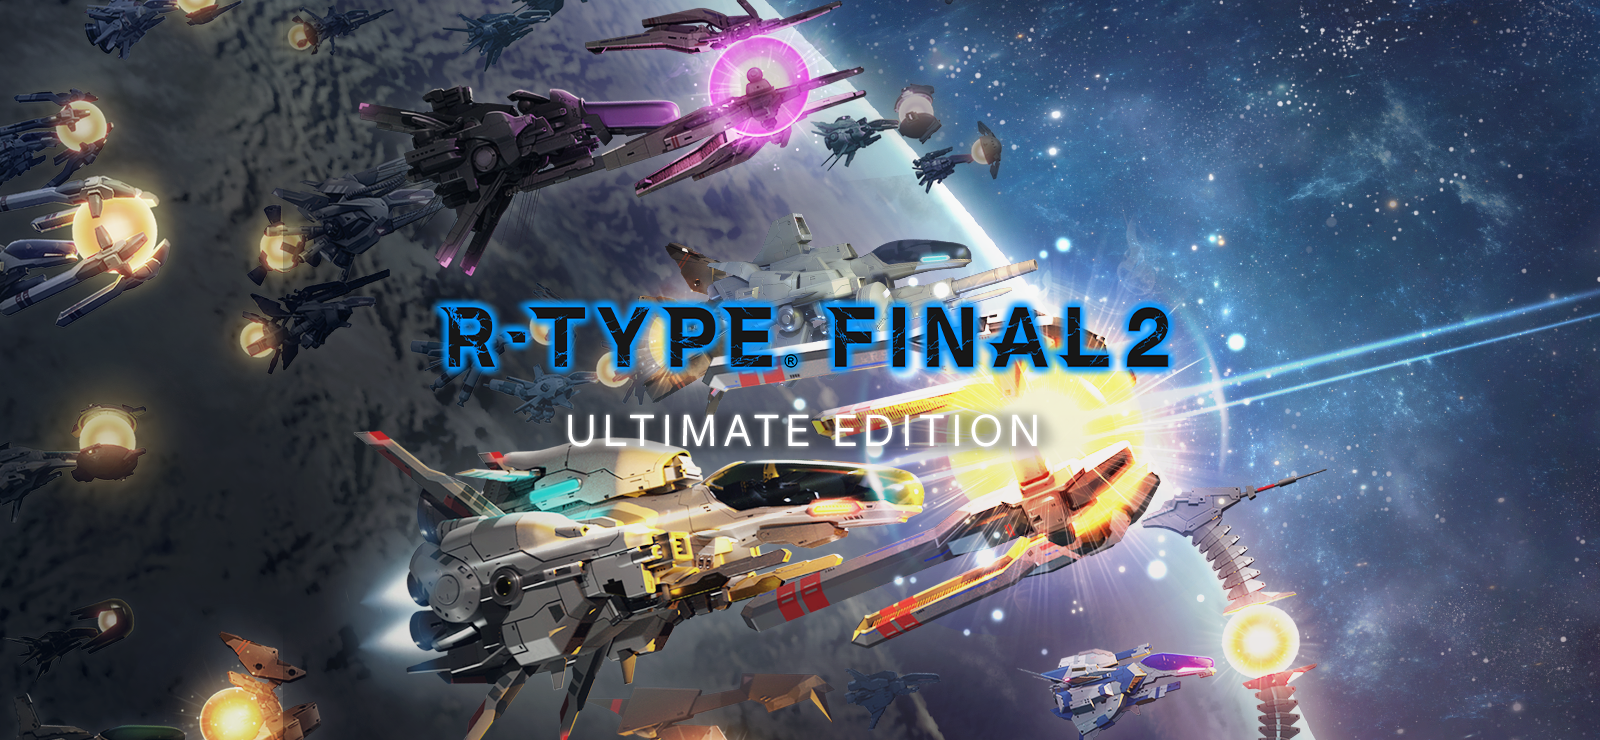 R-Type Final 2 Ultimate Edition